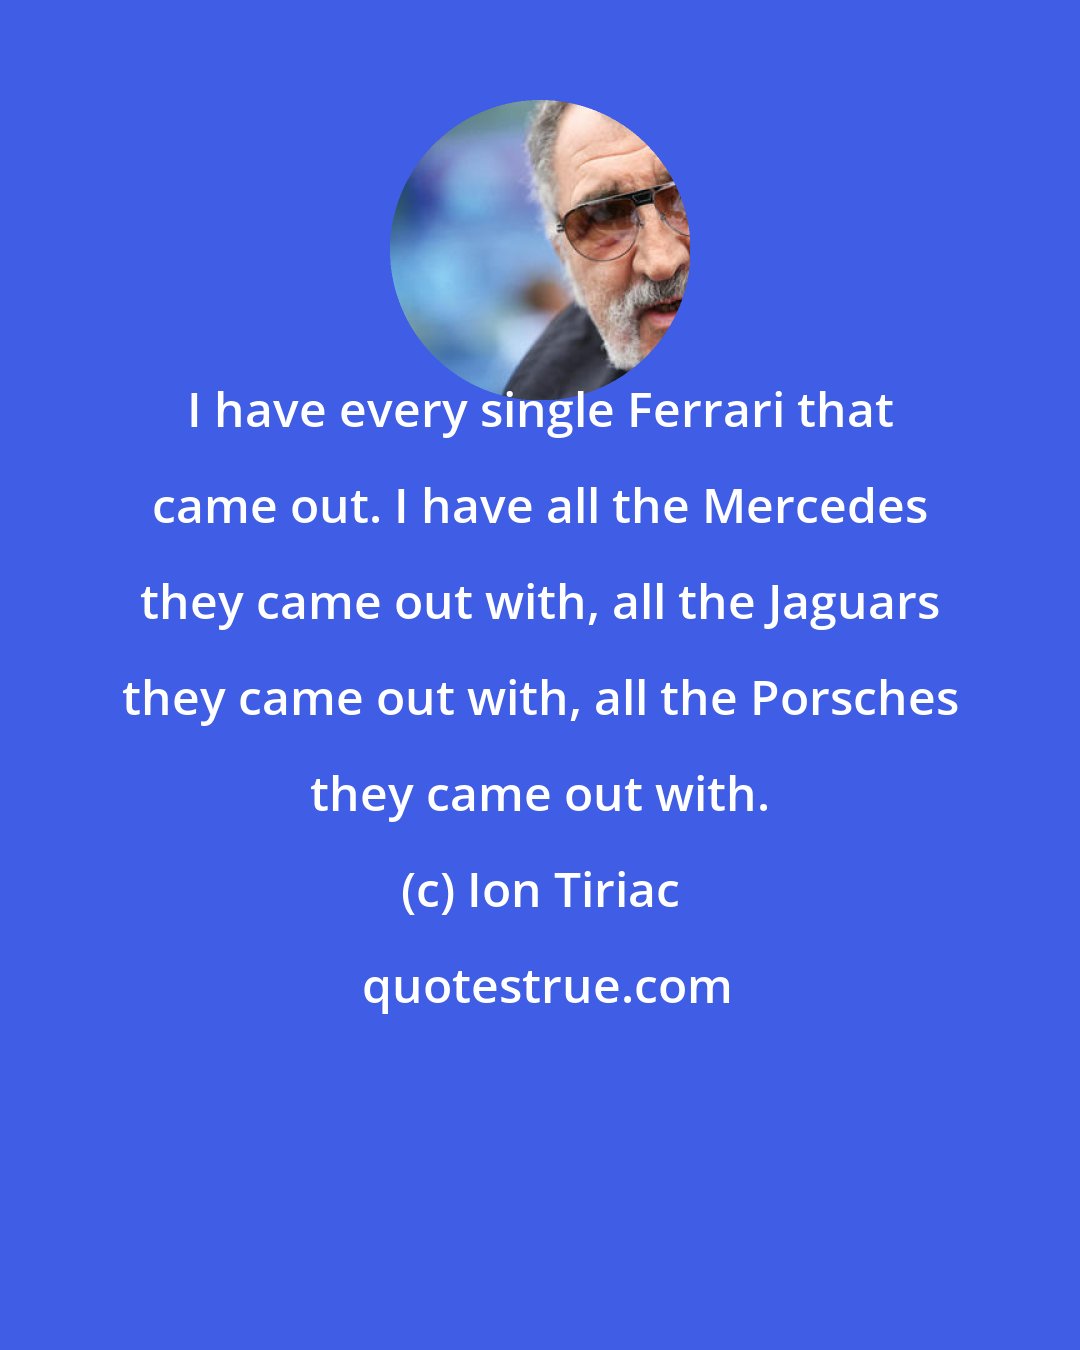 Ion Tiriac: I have every single Ferrari that came out. I have all the Mercedes they came out with, all the Jaguars they came out with, all the Porsches they came out with.